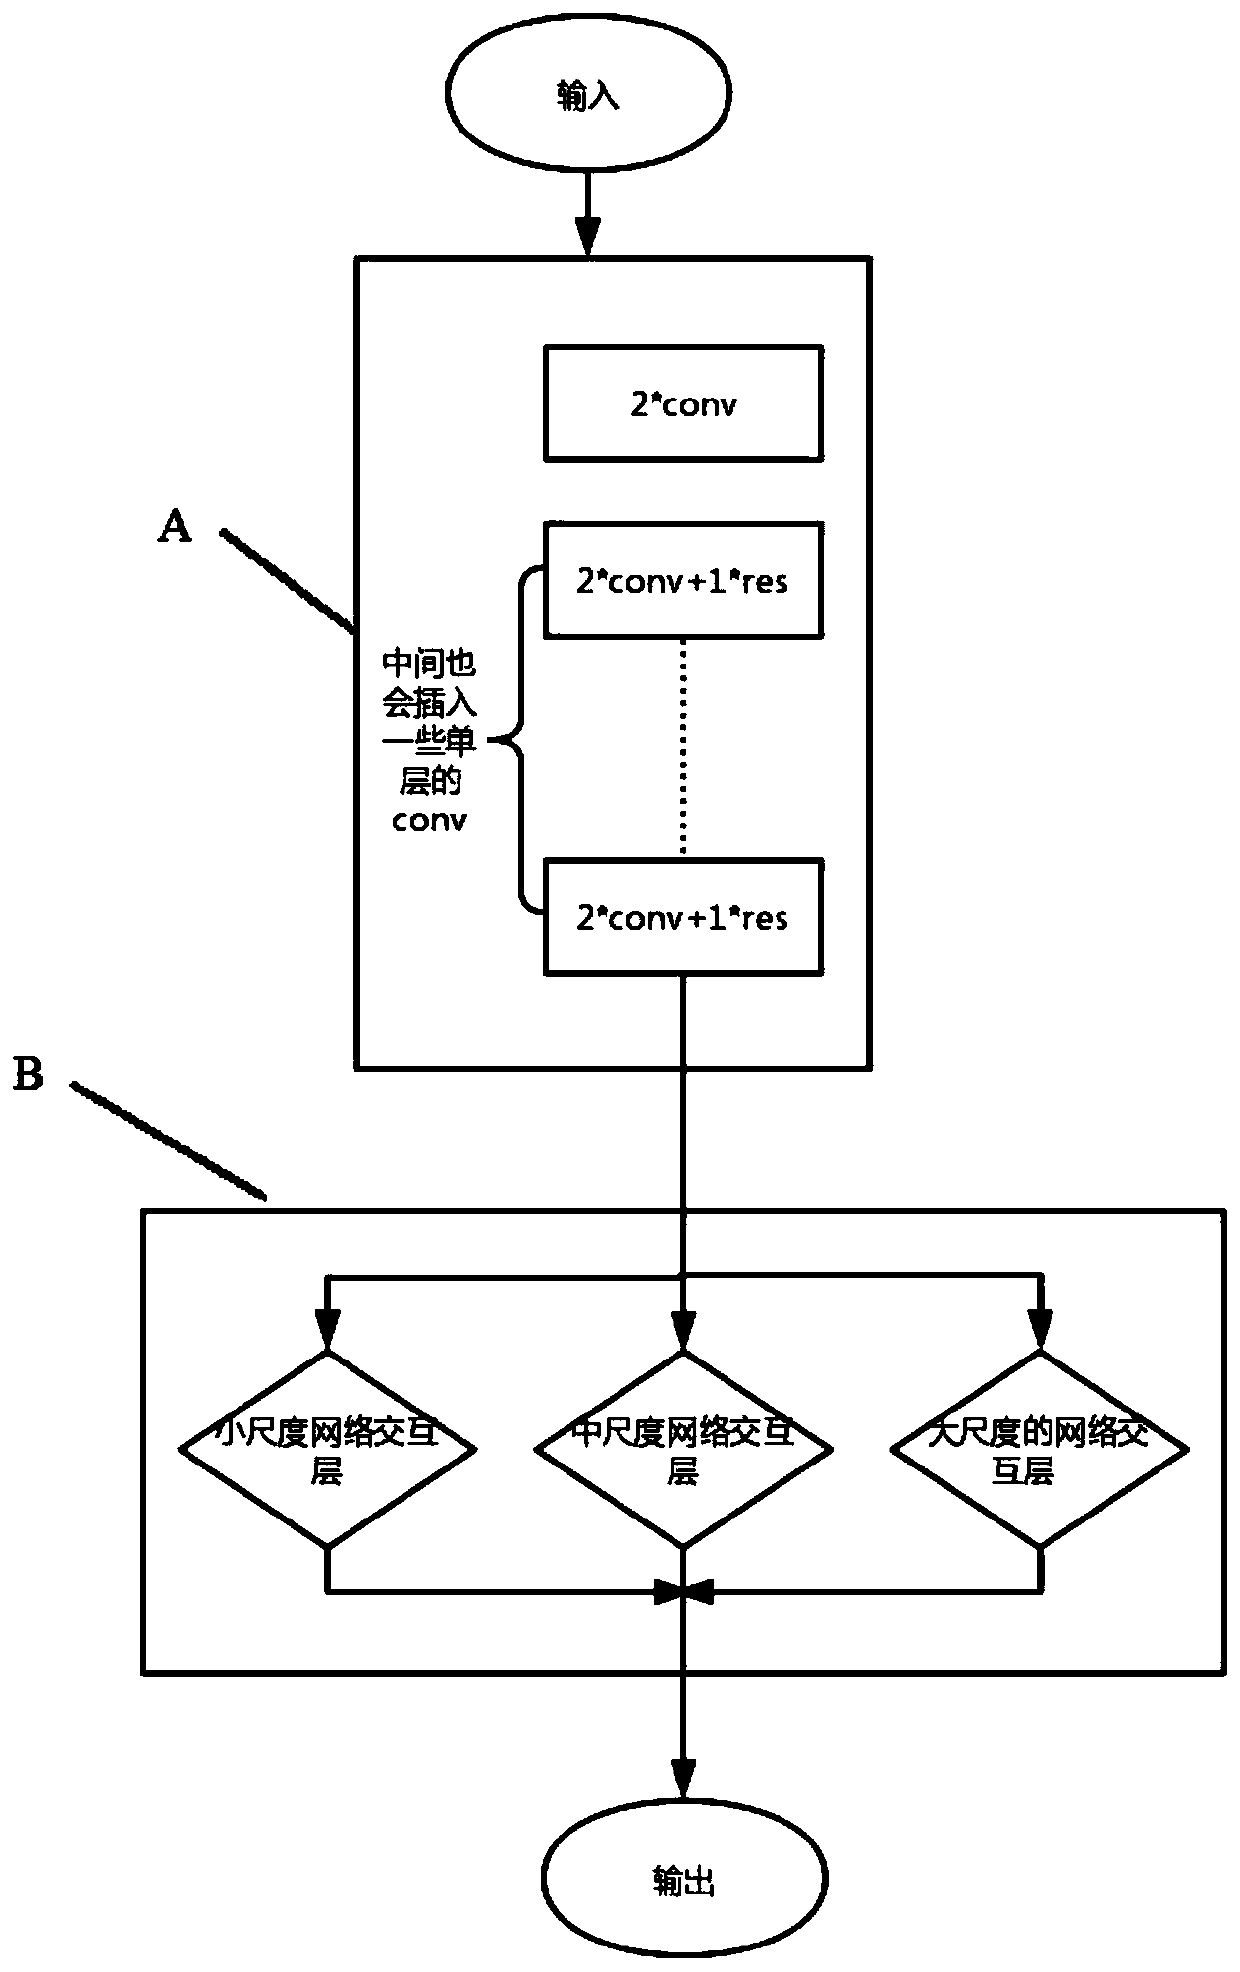 Convolutional neural network-based target detection method and system